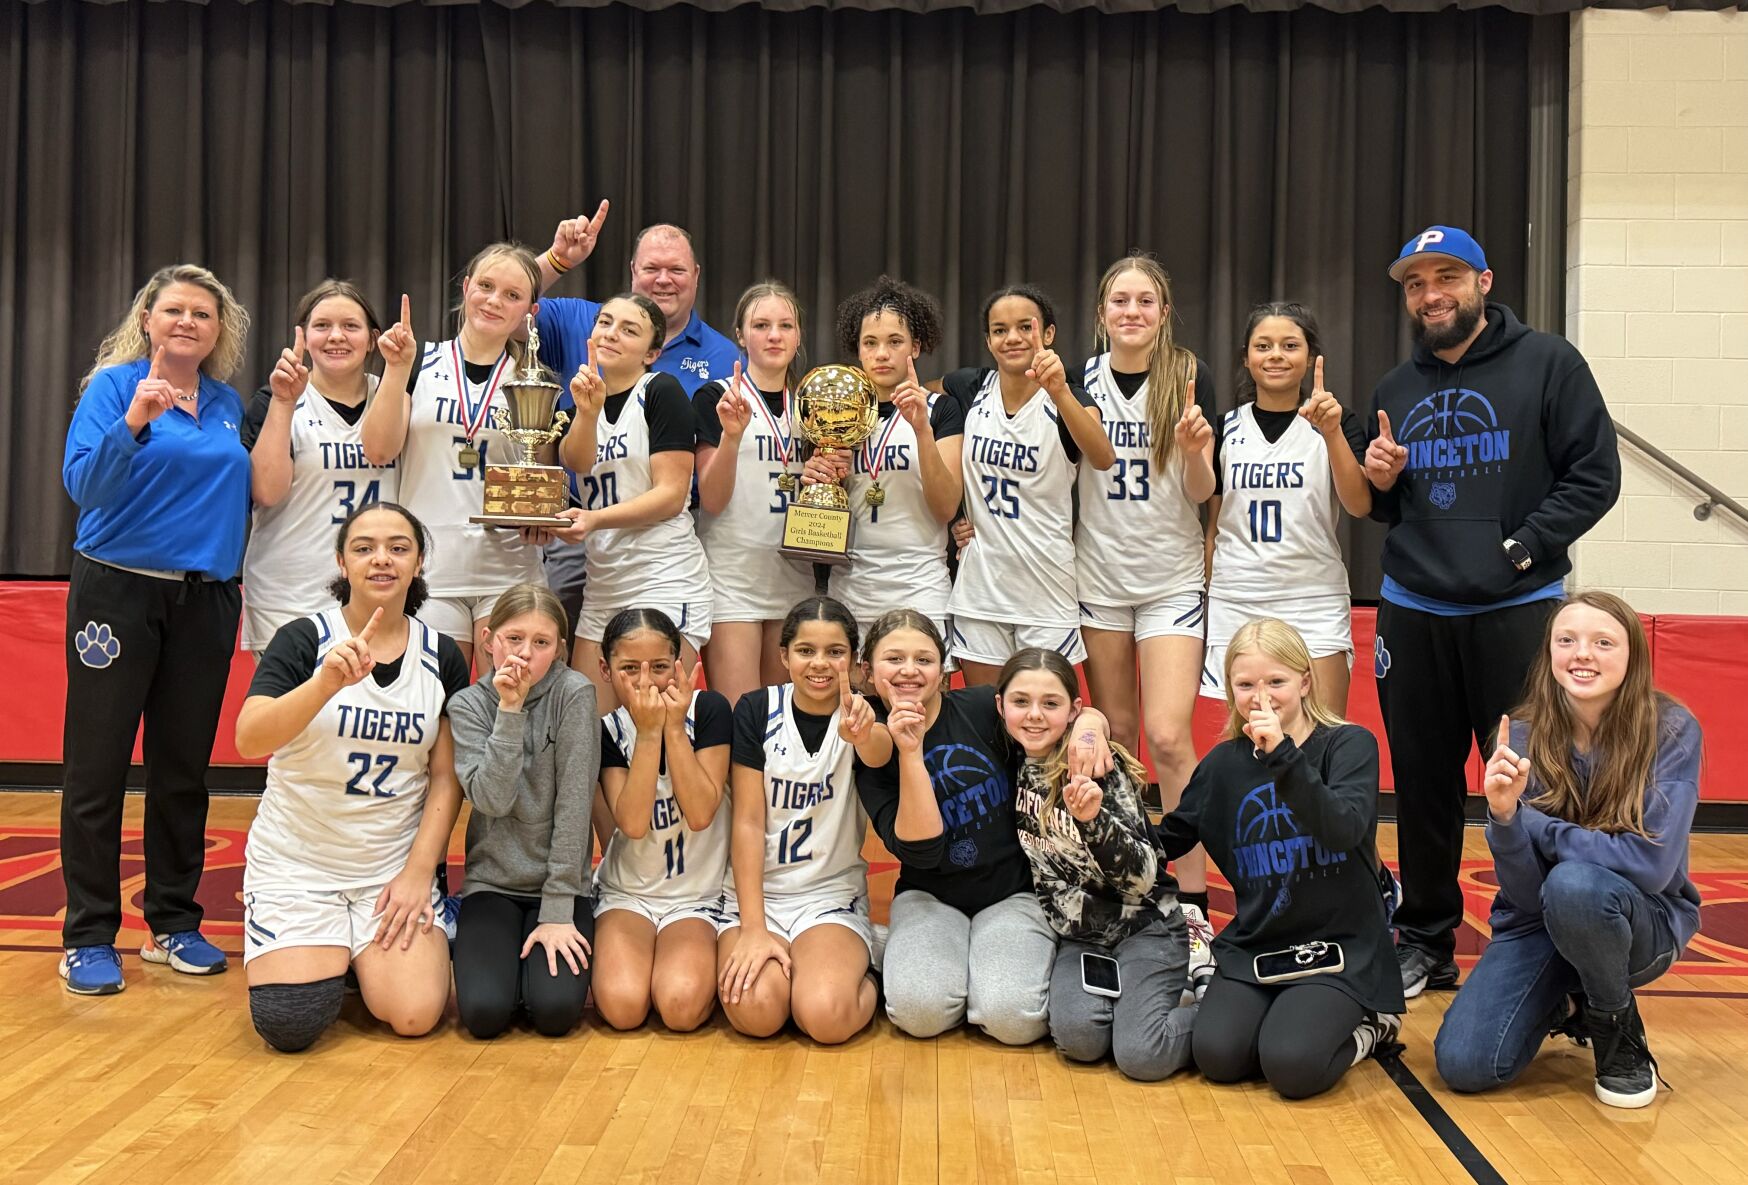 Princeton Middle School Girls Basketball Team Dominates Mercer County Championship with 68-15 Victory